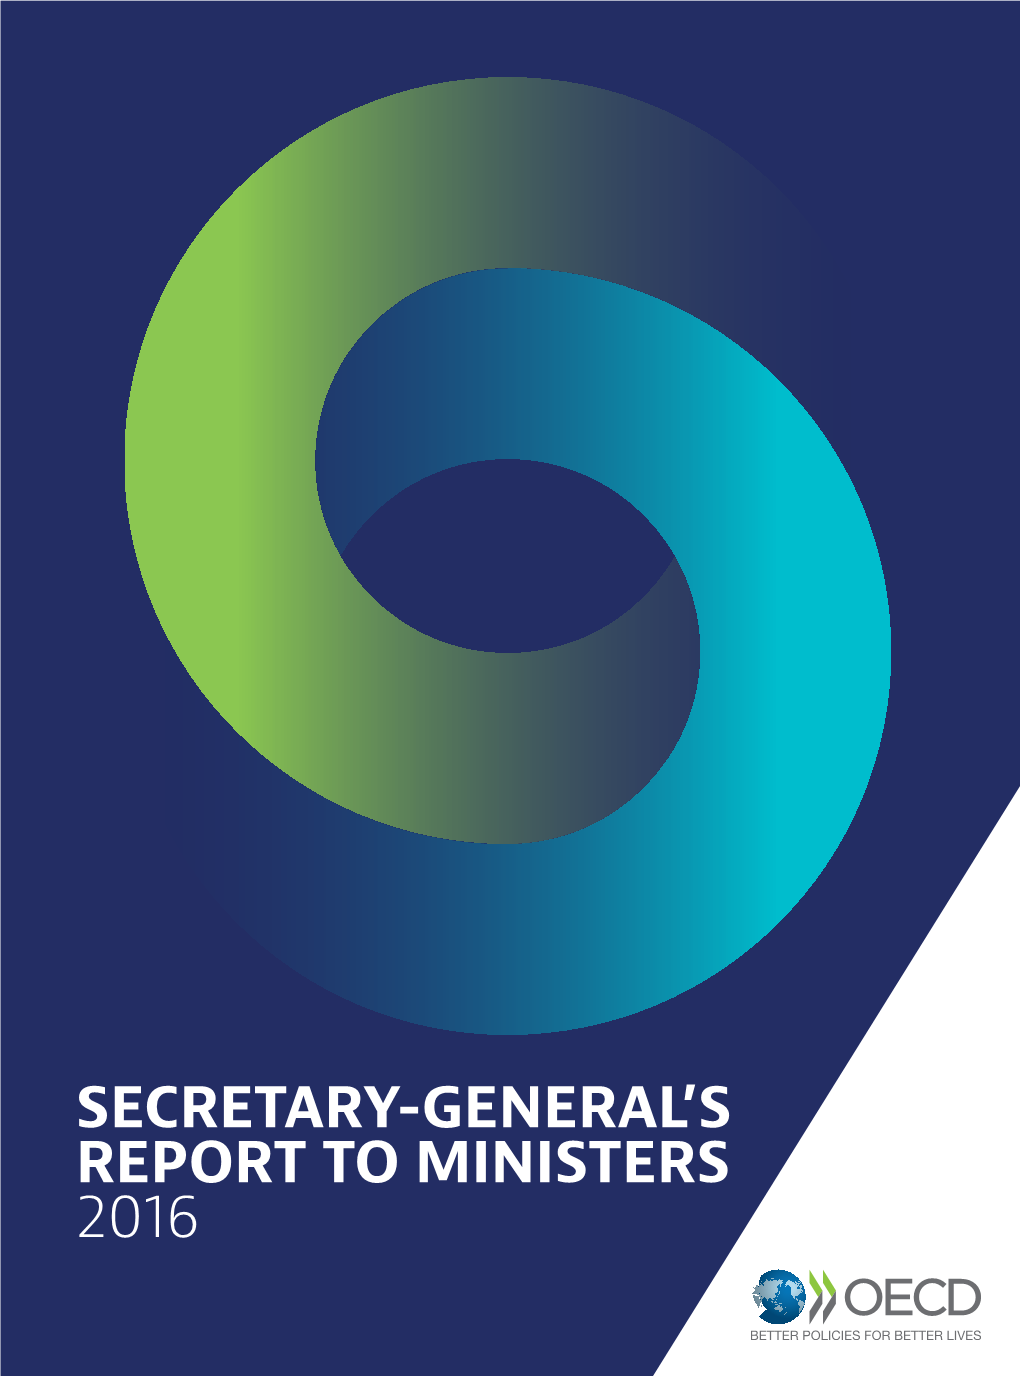 Secretary-General's Report to Ministers 2016